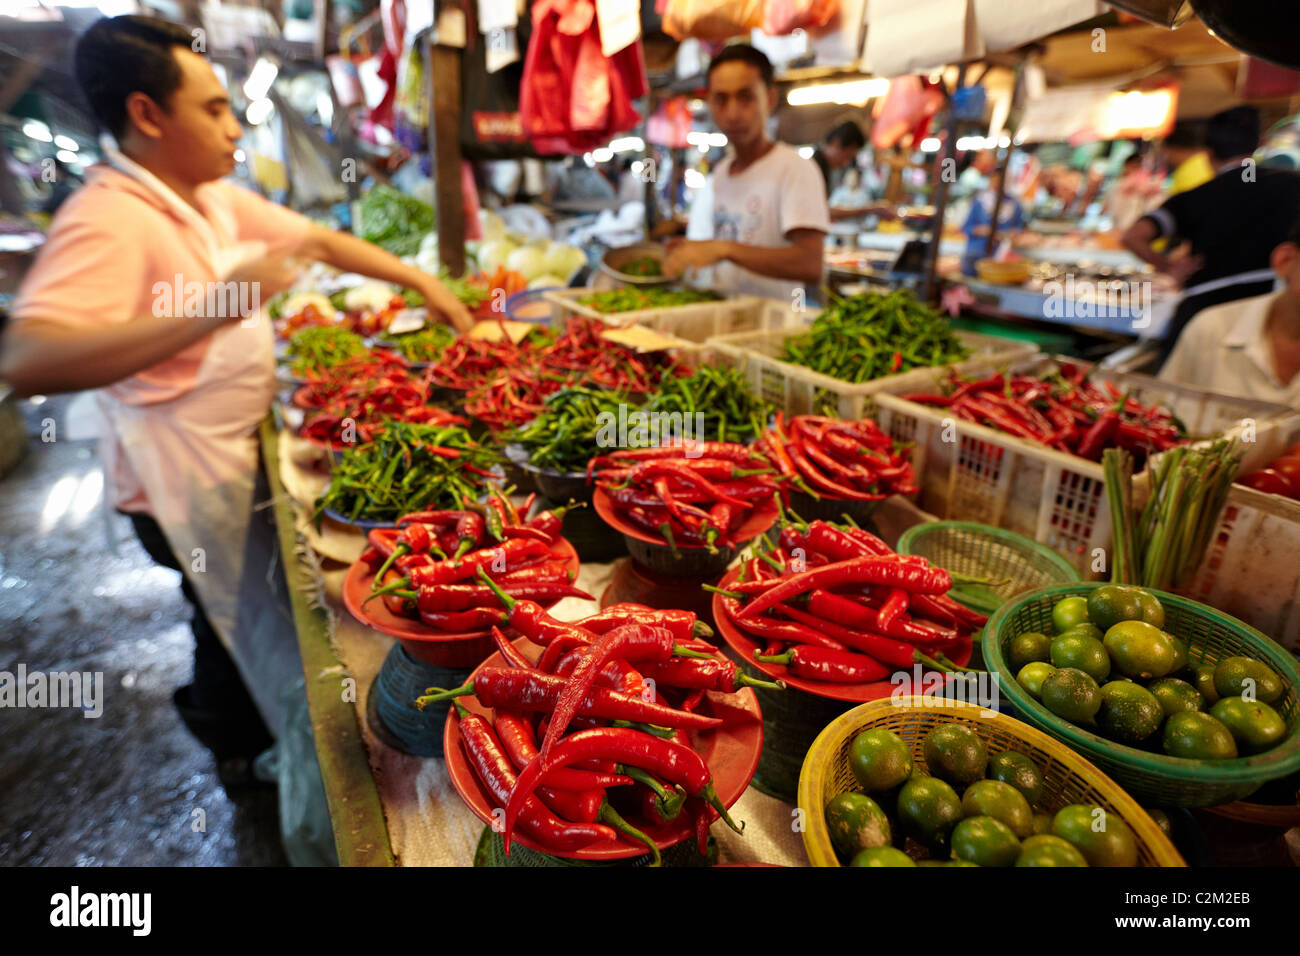 Chillies, fruit, vegetables, meat and fish for sale at the Chow Kit Market in Kuala Lumpur, Malaysia Stock Photo